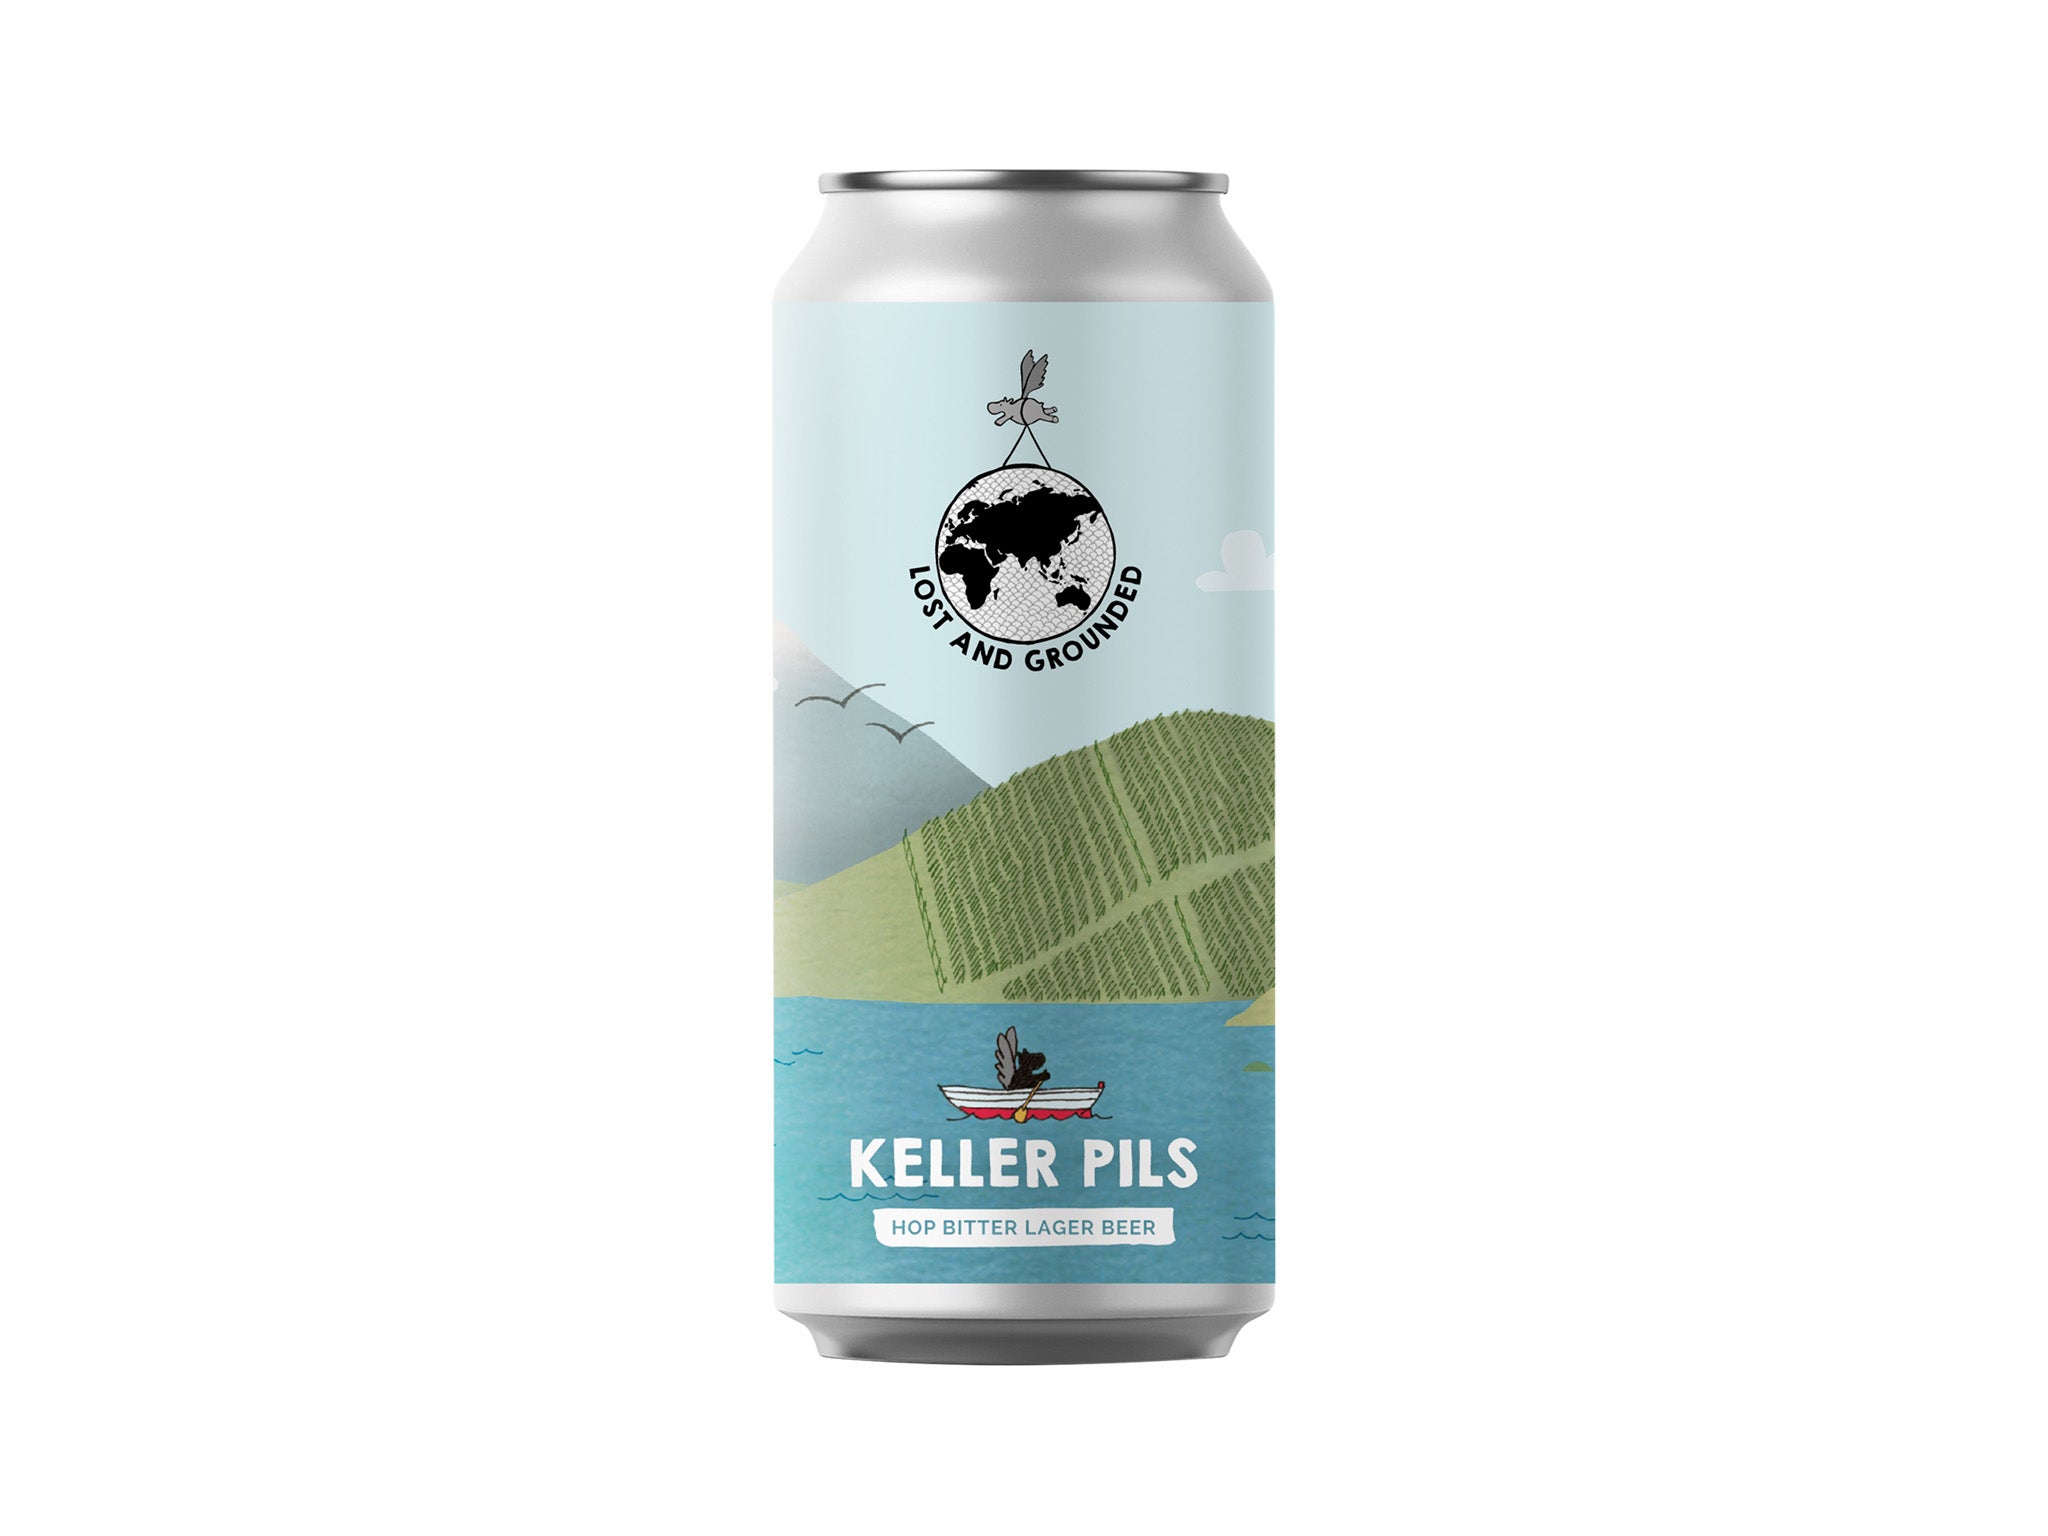 Lost and Grounded Brewers keller pills, 4.8%